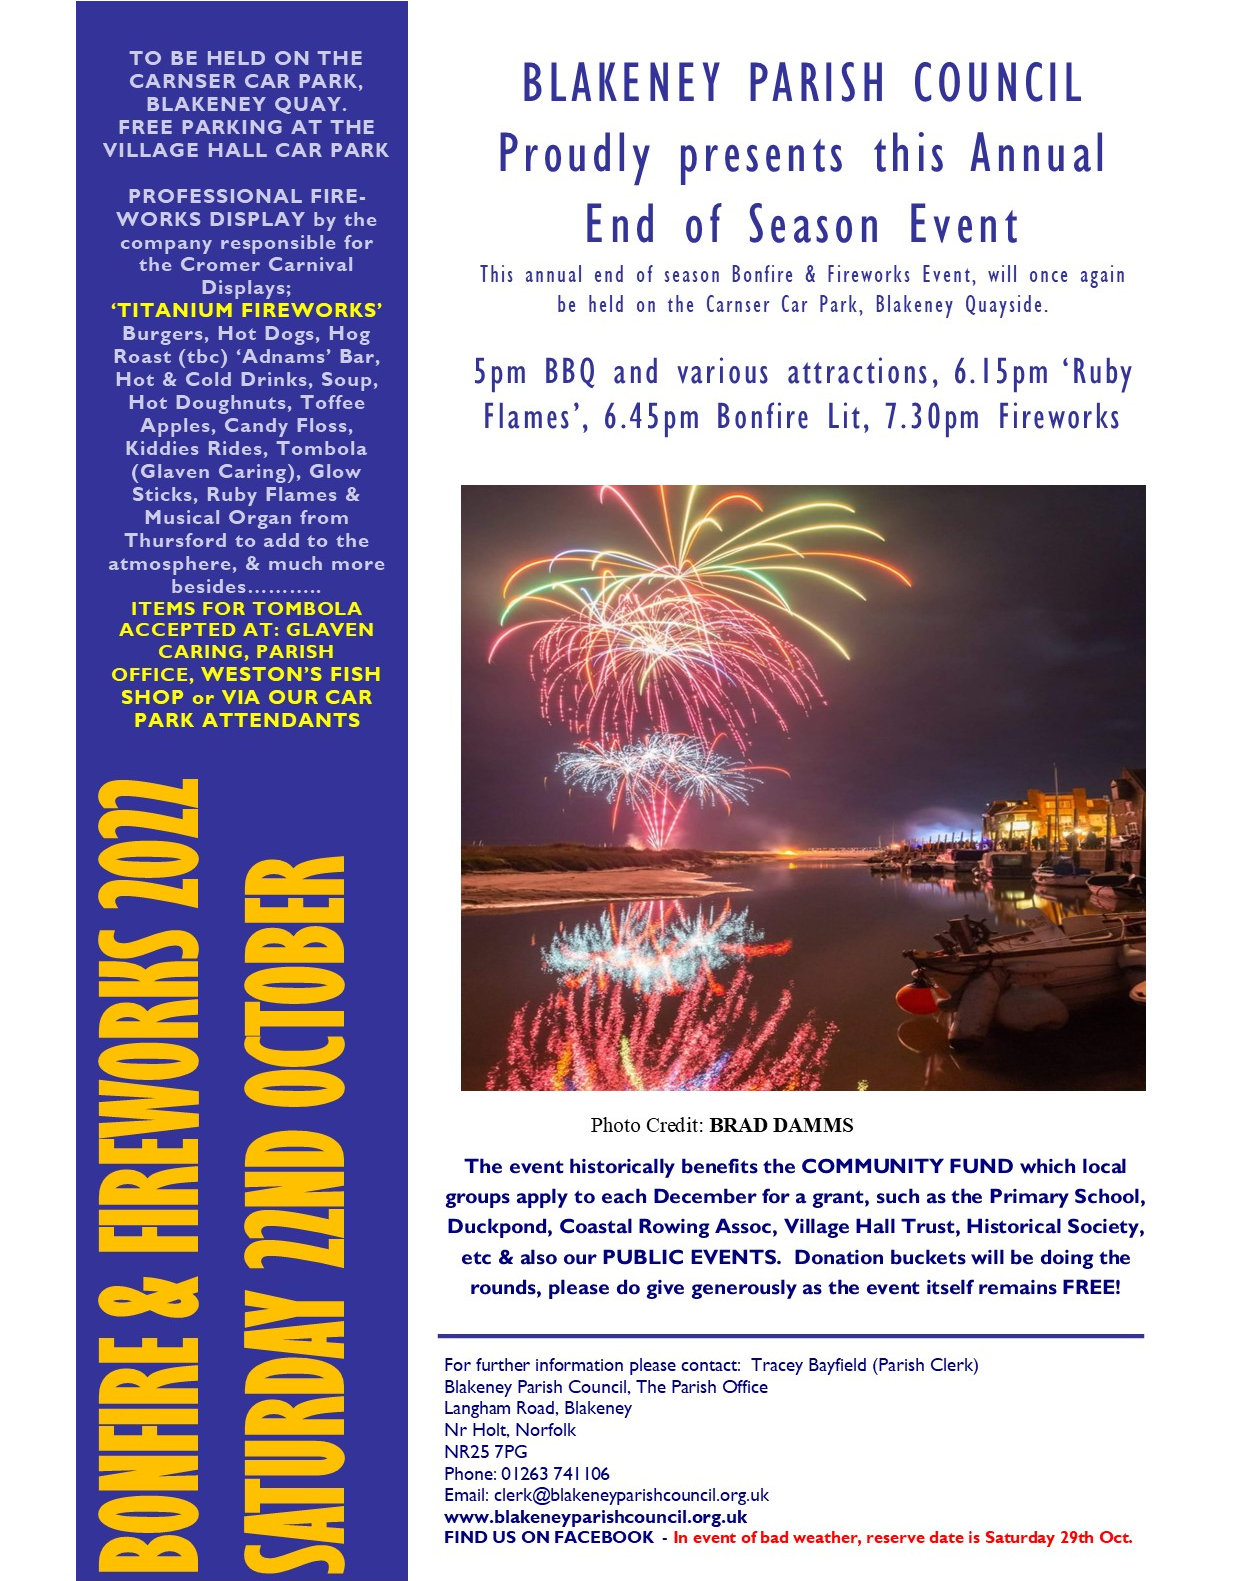 End of Season Bonfire & Fireworks Event, The Quay, Blakeney, Norfolk, NR25 7PG | Our annual end of season Bonfire & Fireworks event; a great fun filled family evening out on the North Norfolk Coast | family, free, blakeney, children, coast, fireworks, bonfire